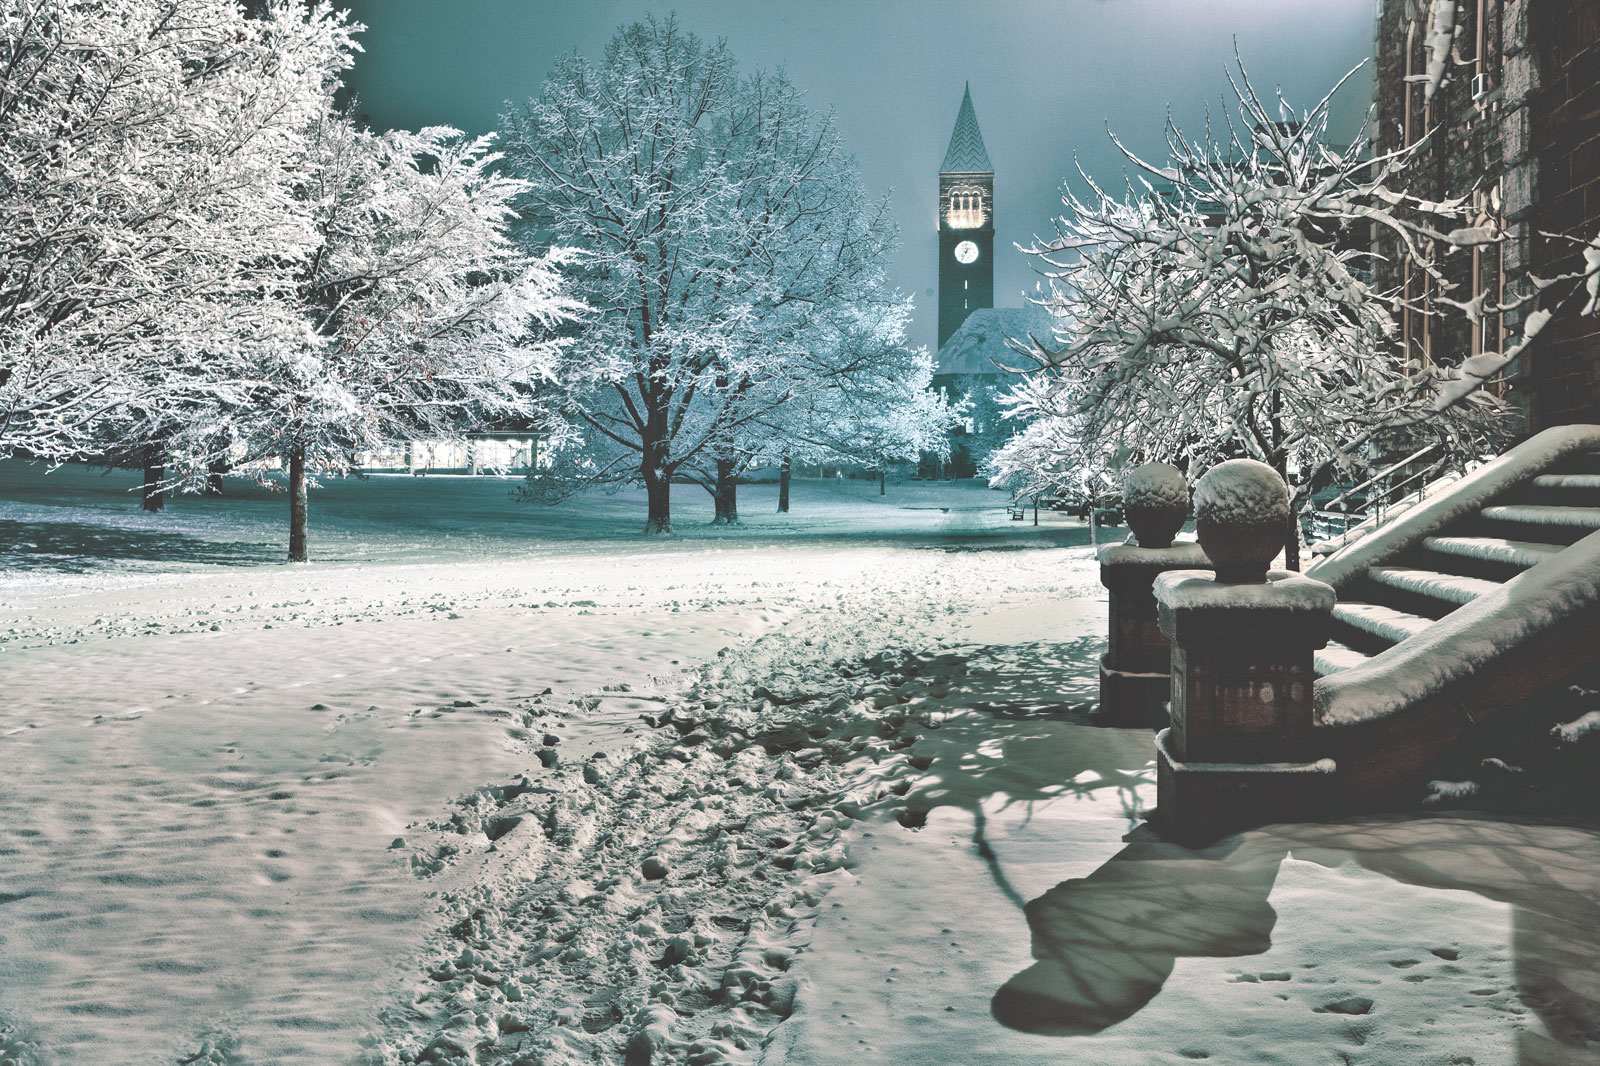 Night view of McGraw Tower and a snow-covered Arts Quad